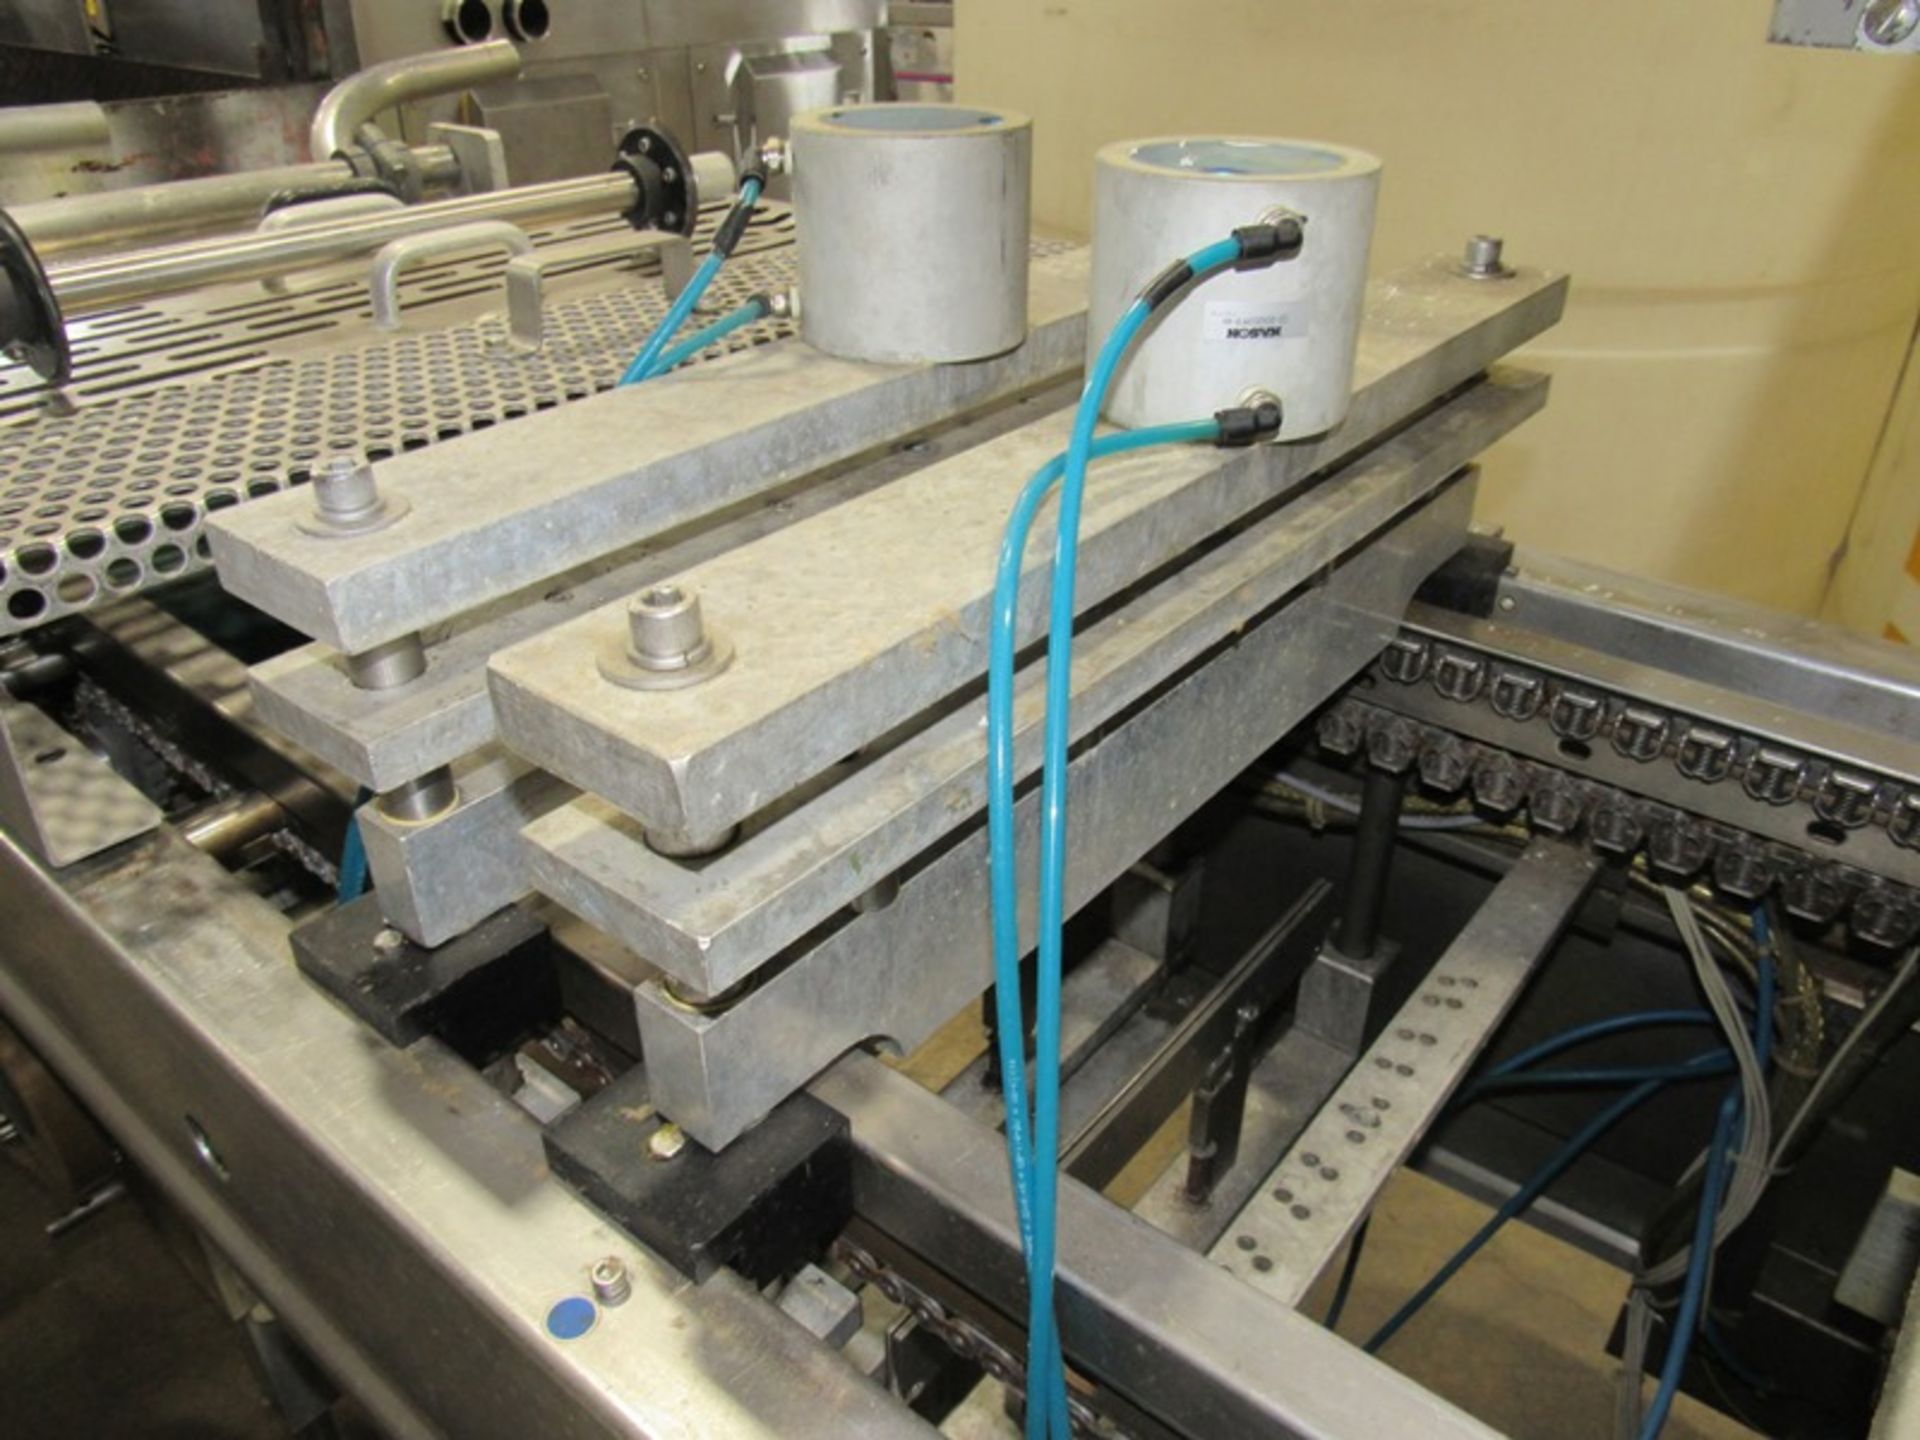 Multivac Rollstock Thermoformer Packaging Machine, 16 5/8" between chains, approx. 13 1/2" - Image 12 of 25